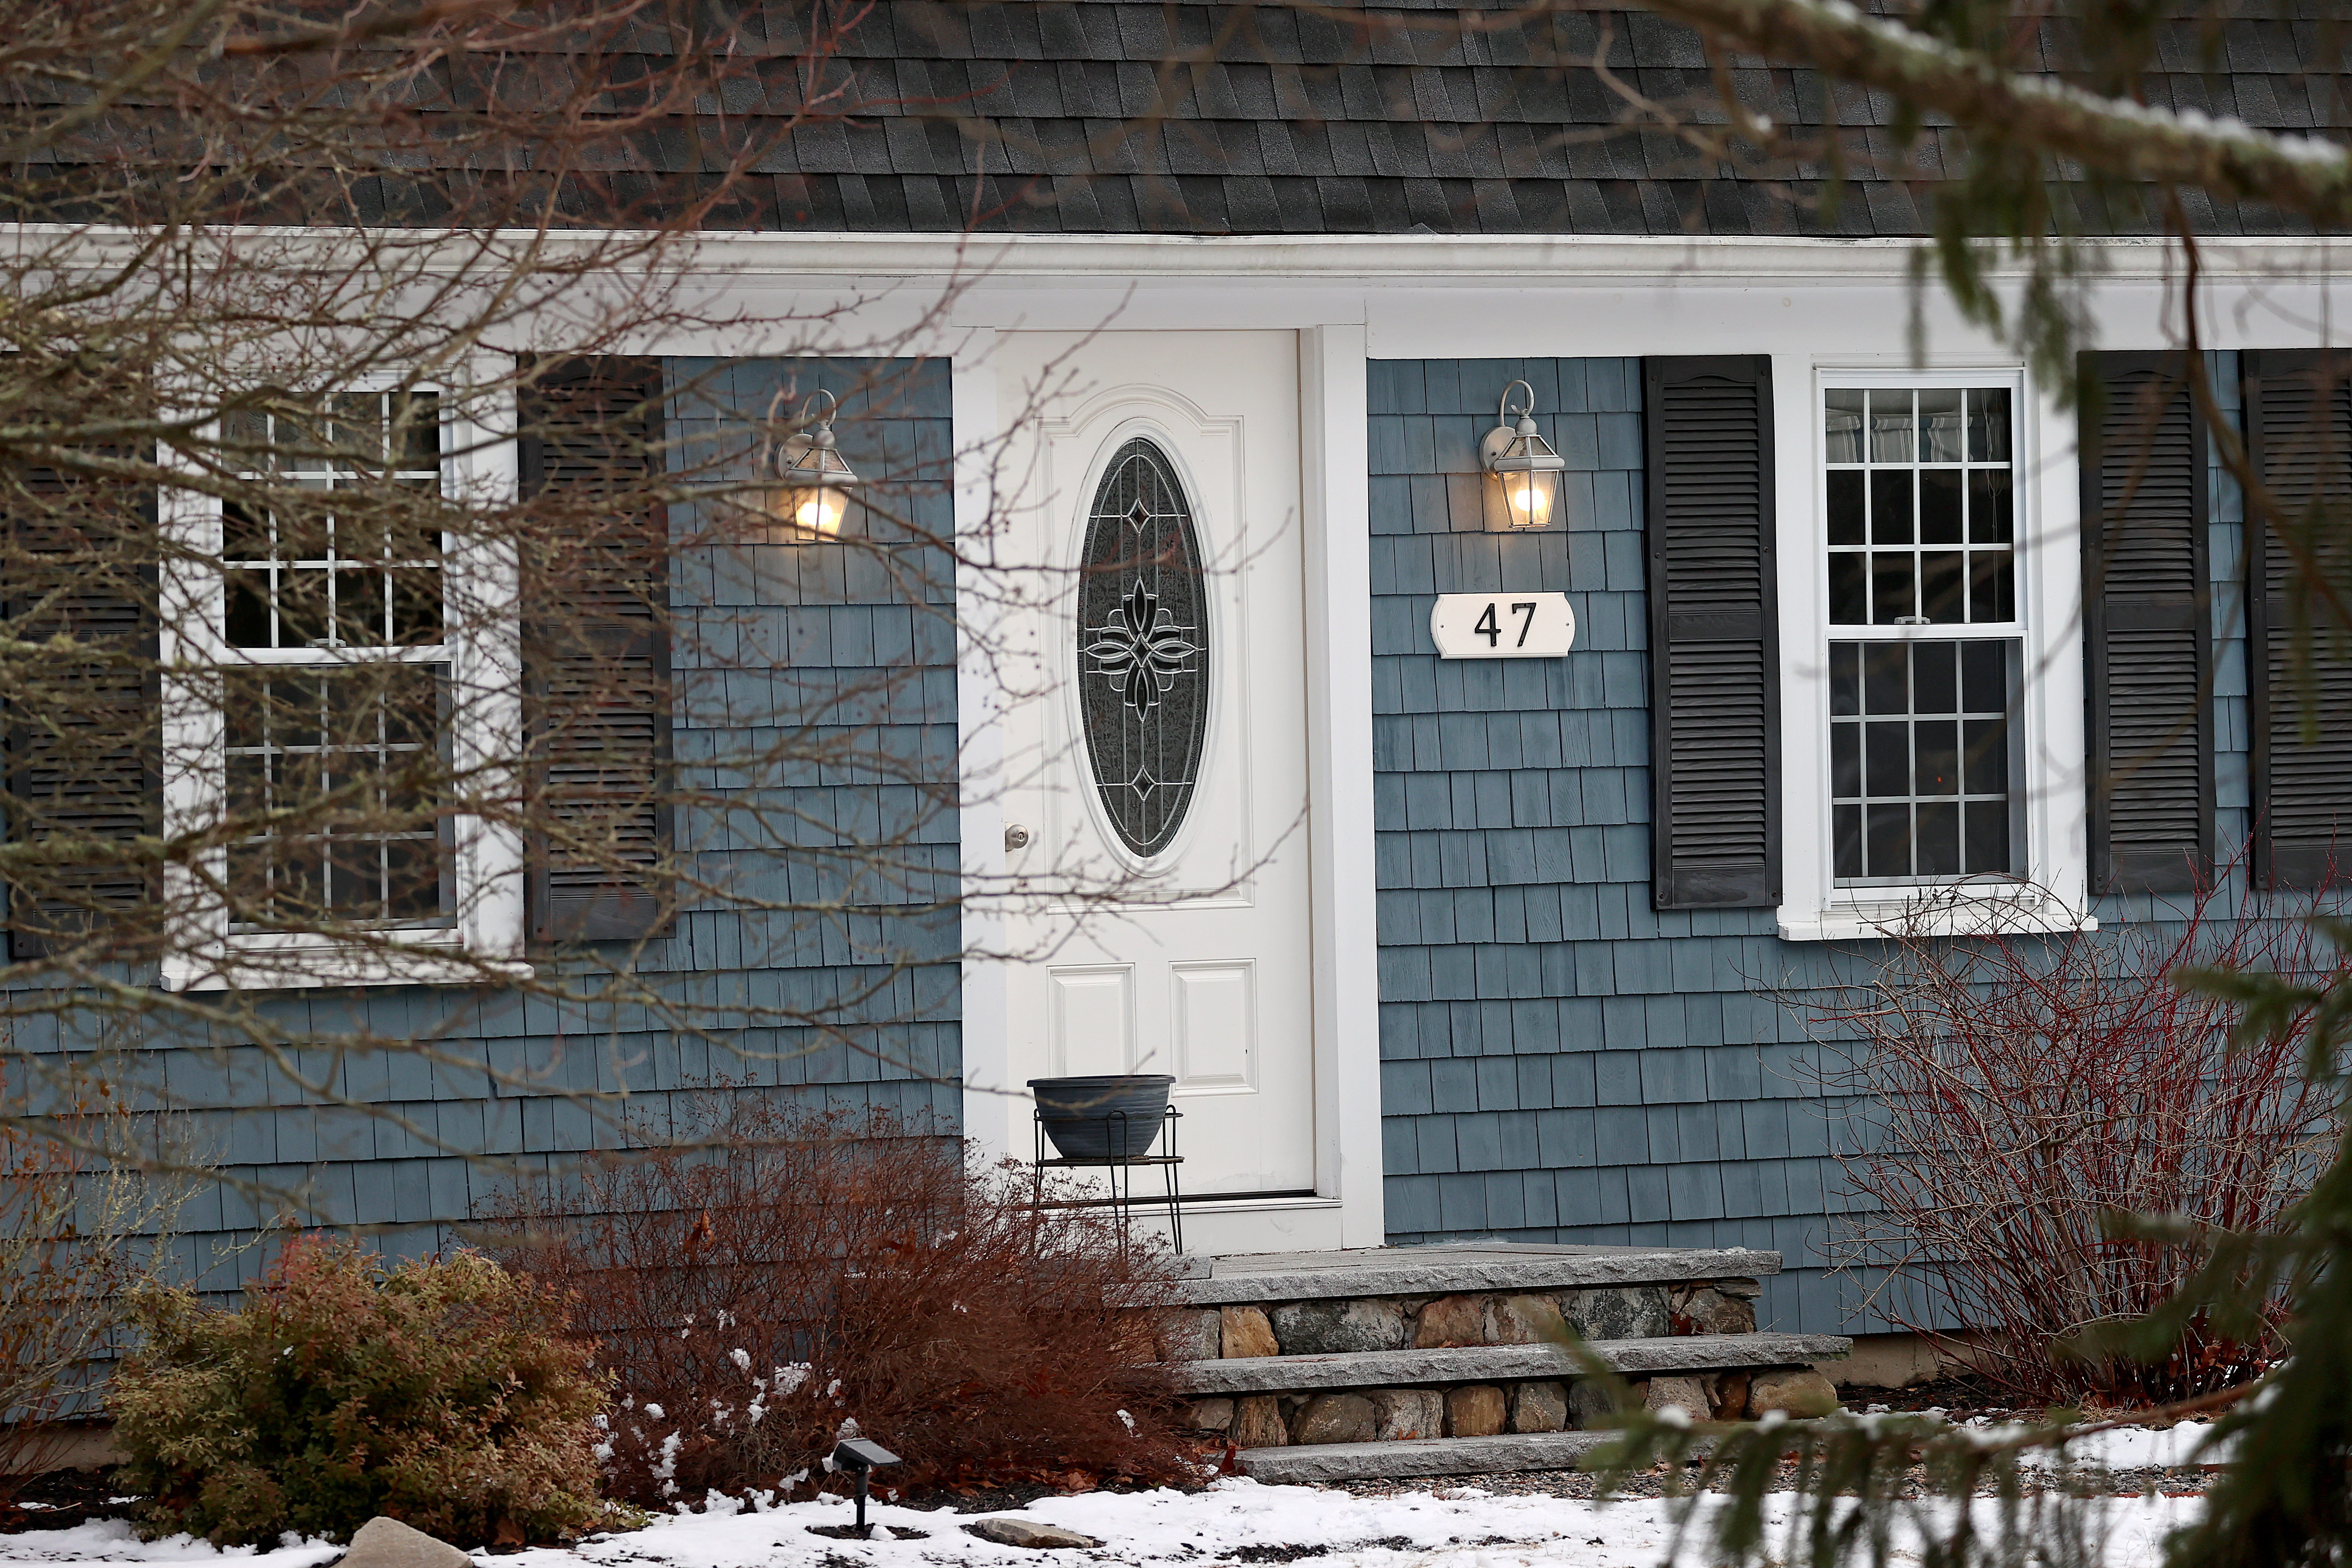 In Duxbury, MA, on January 25th, a man called the fire and police to report that a woman had attempted to kill herself at a residence where the bodies of two deceased children were discovered in the house. (Photo by Ryan/The Boston Globe via Getty Images)